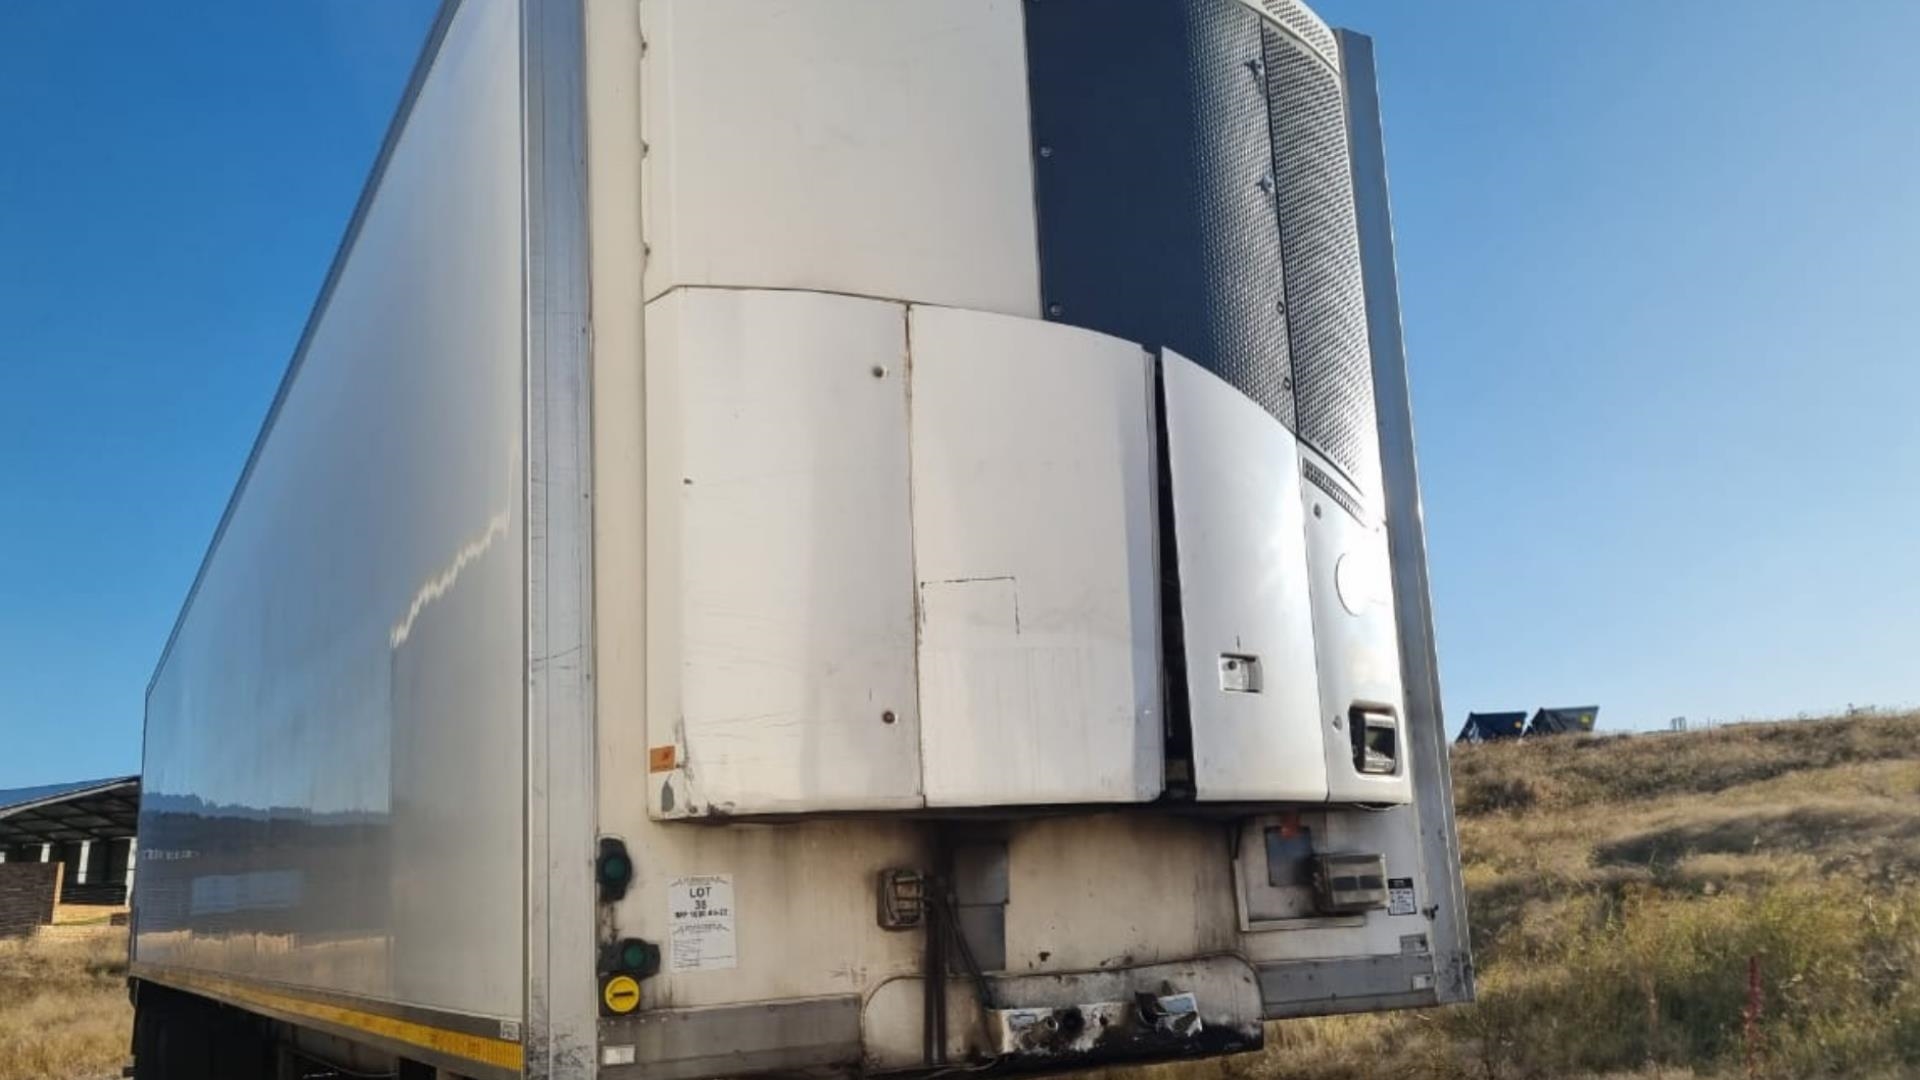 Serco Trailers 2012 Serco Fridge Trailer 2012 for sale by Truck and Plant Connection | Truck & Trailer Marketplaces